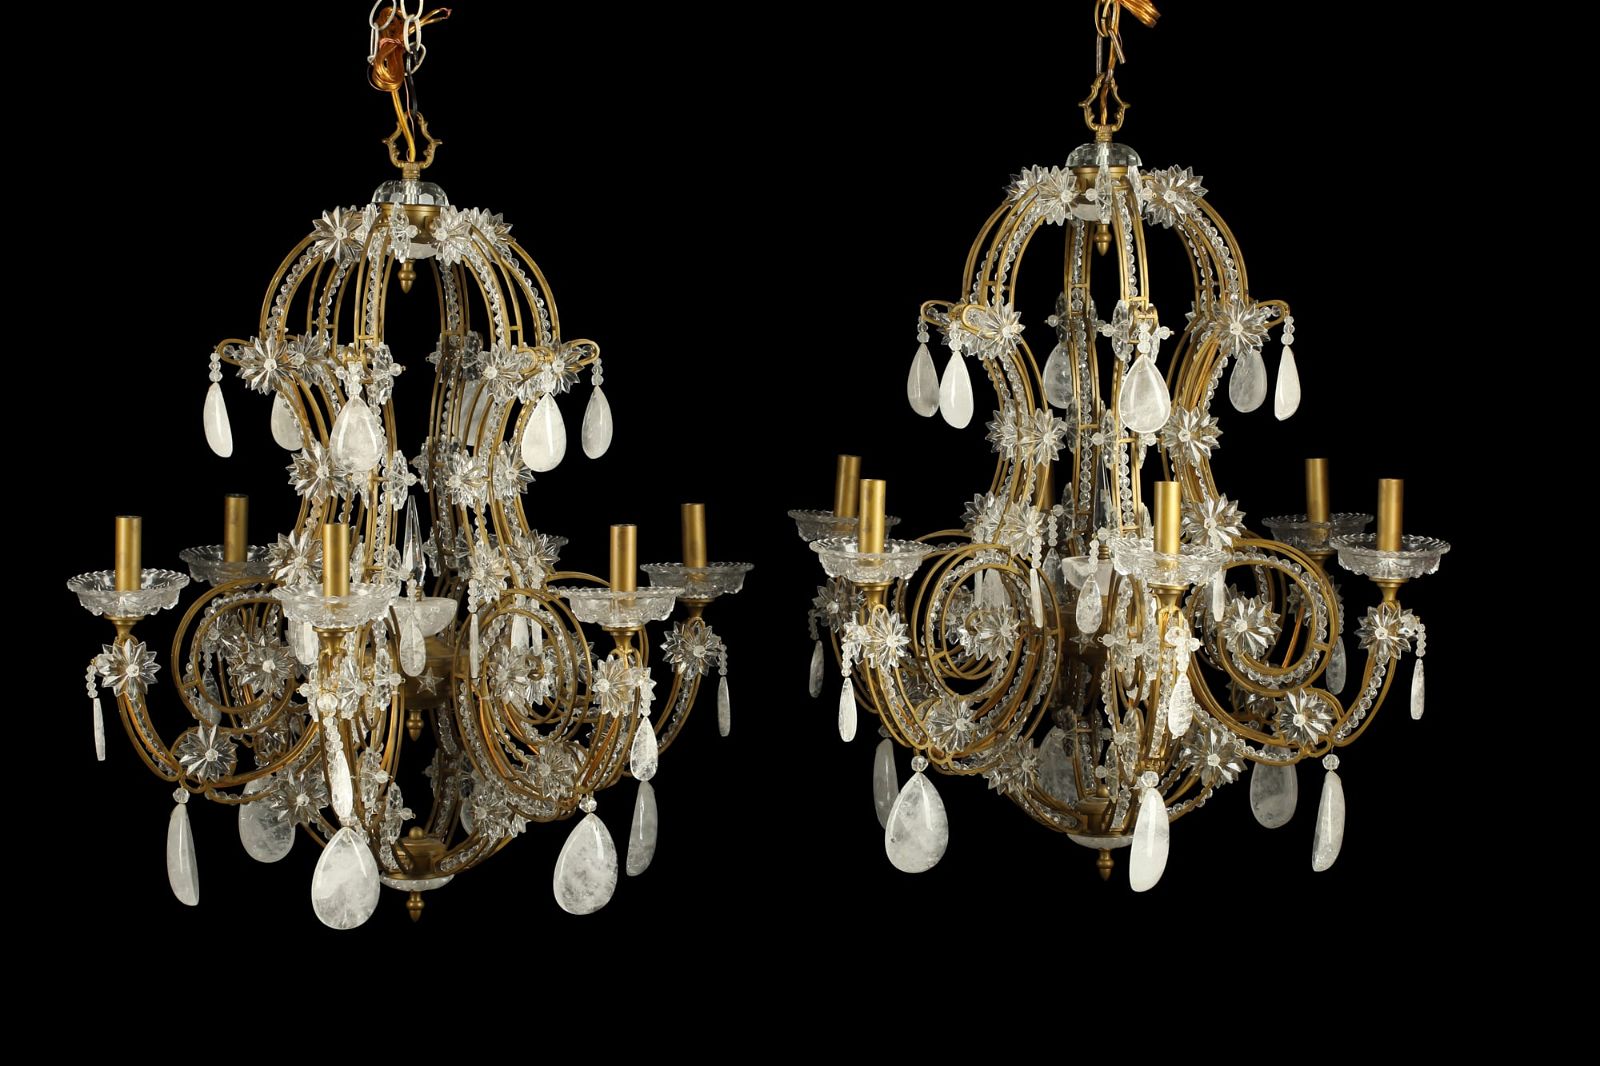 PAIR OF ROCOCO STYLE GLASS AND